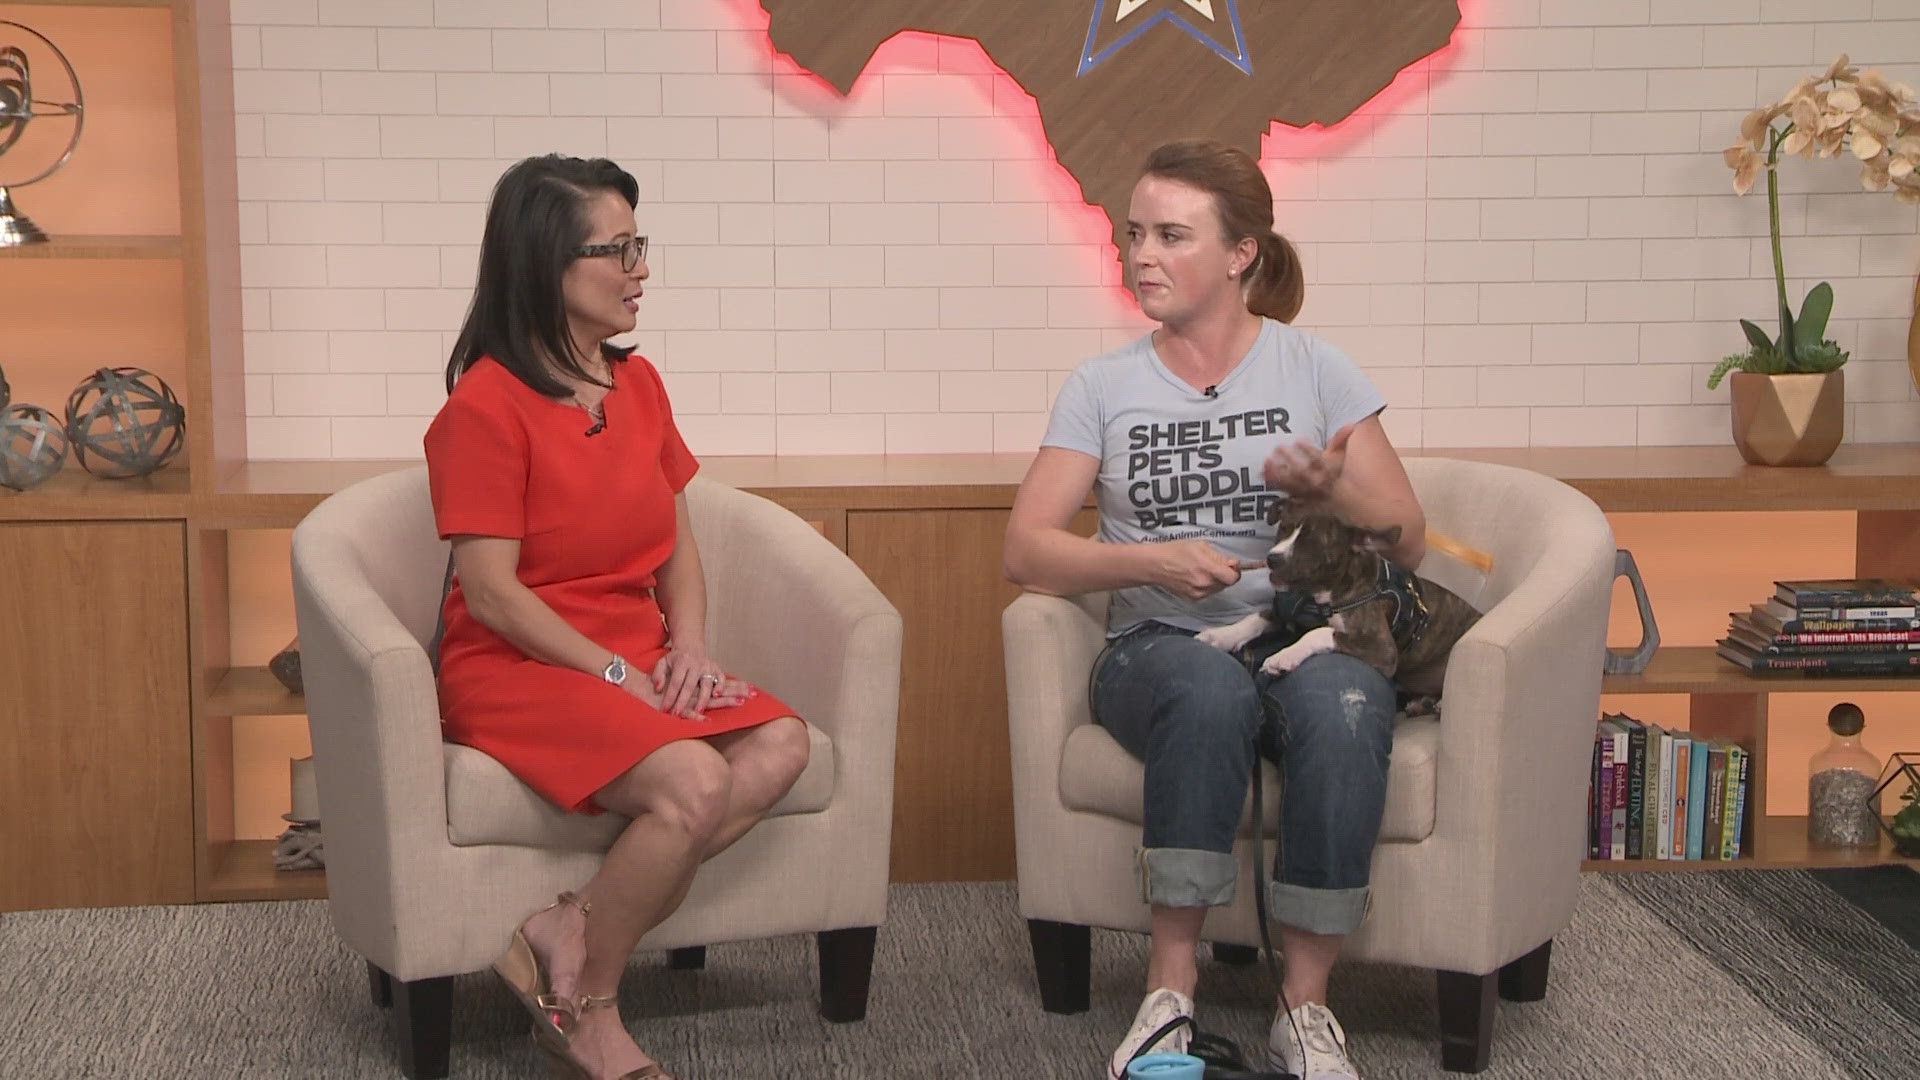 Every week, KVUE partners with a Central Texas animal shelters to feature pets looking for homes.